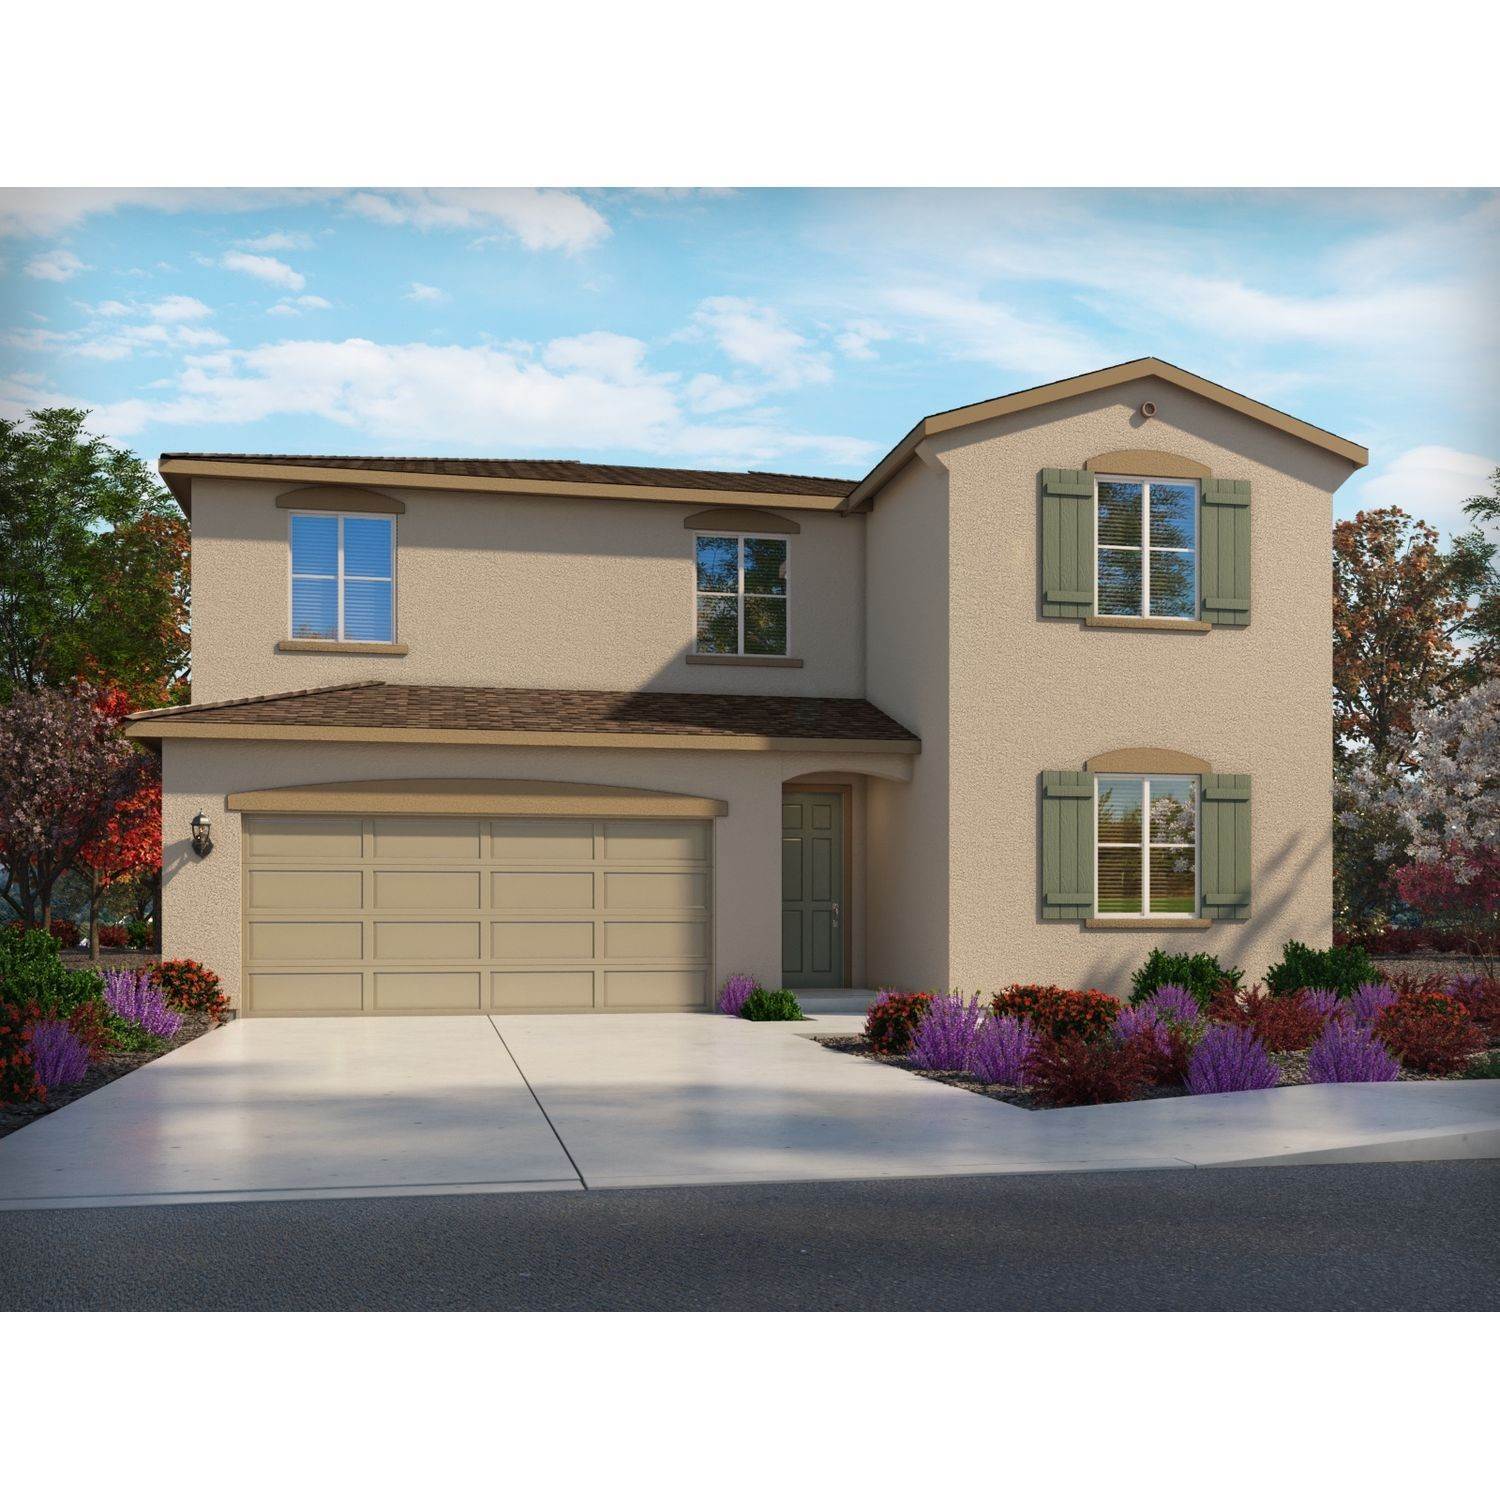 Single Family for Sale at Lincoln, CA 95648